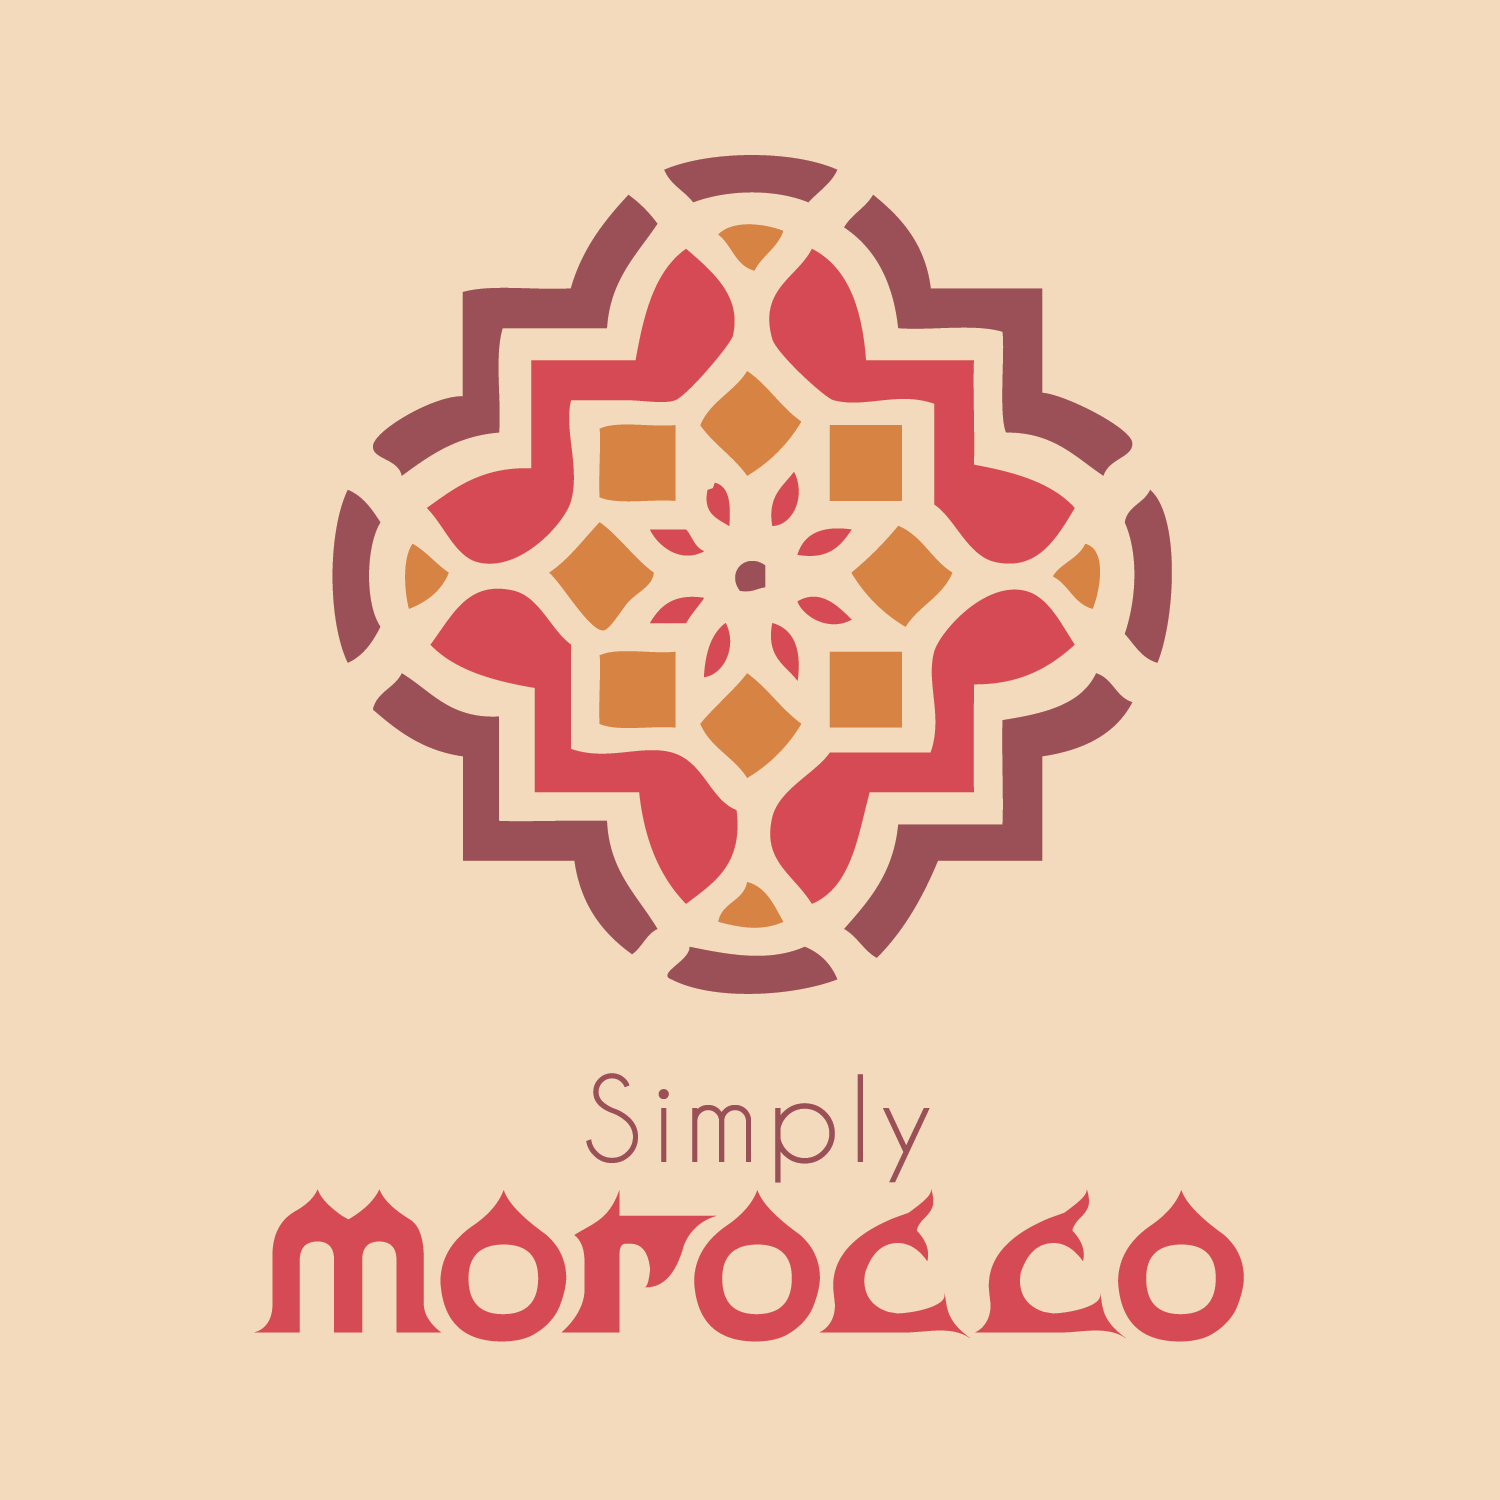 Moroccan Logo - nice #logo idea and #color scheme, needs refinement. Pattern